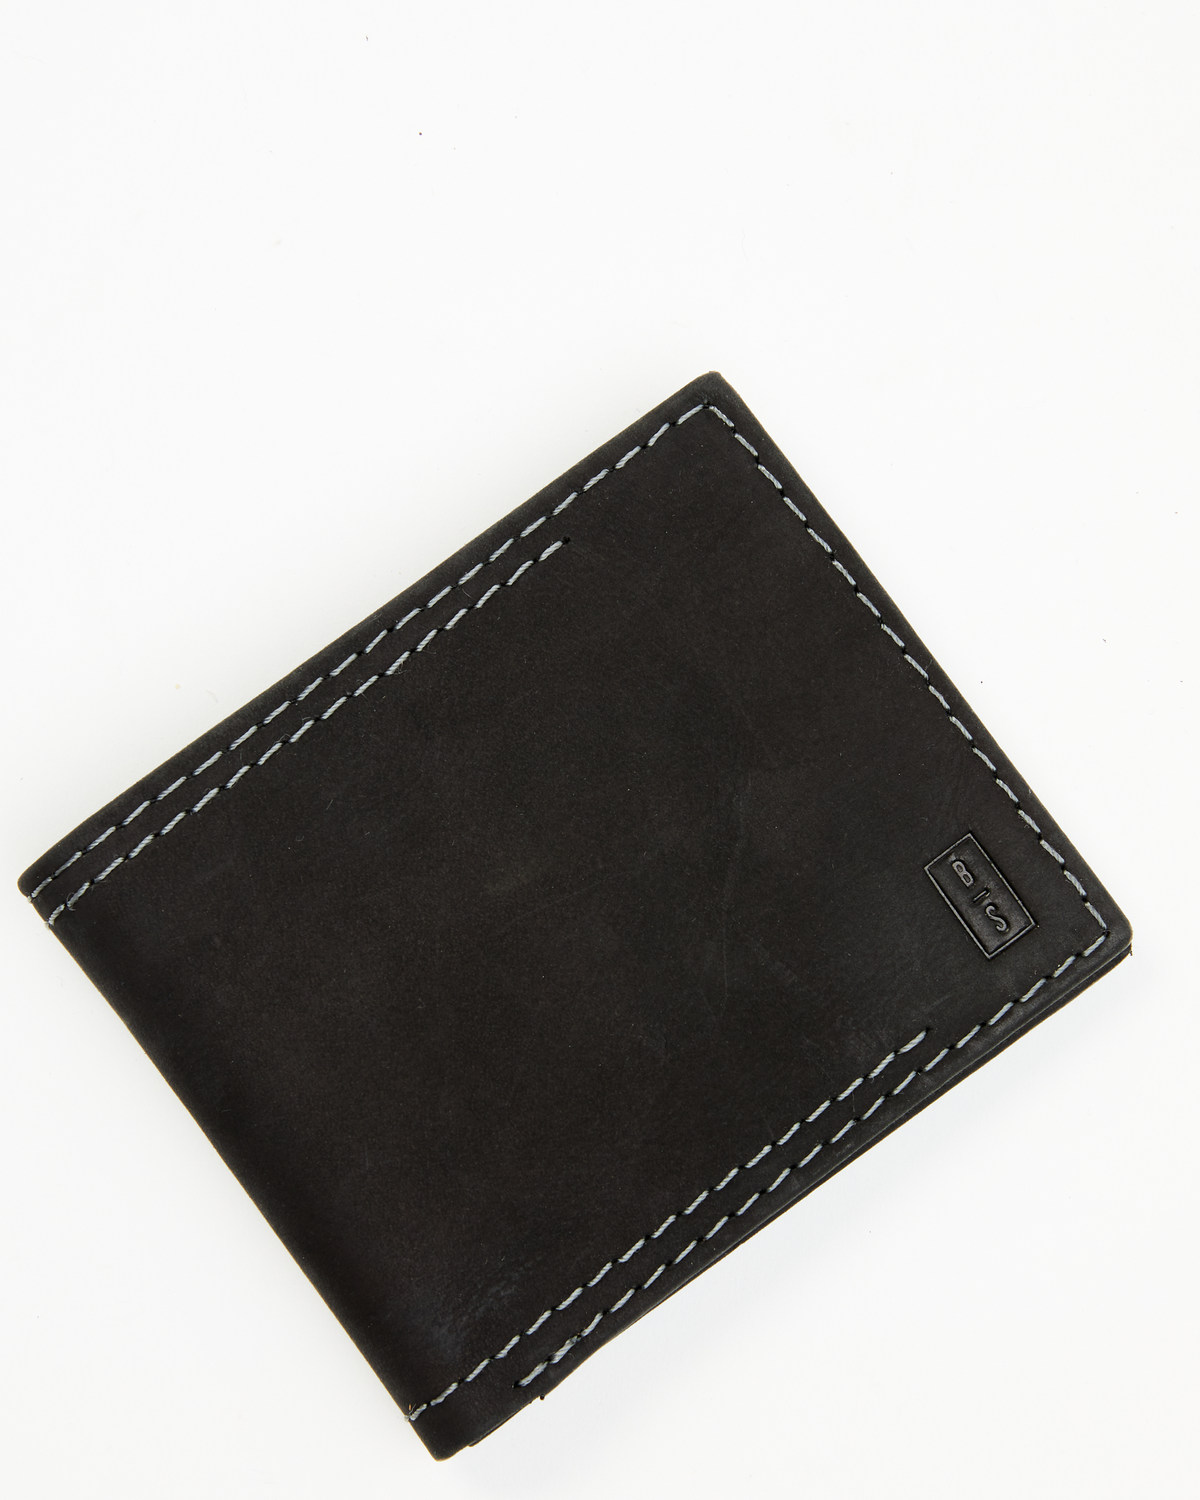 Brothers and Sons Men's Leather Bifold Wallet